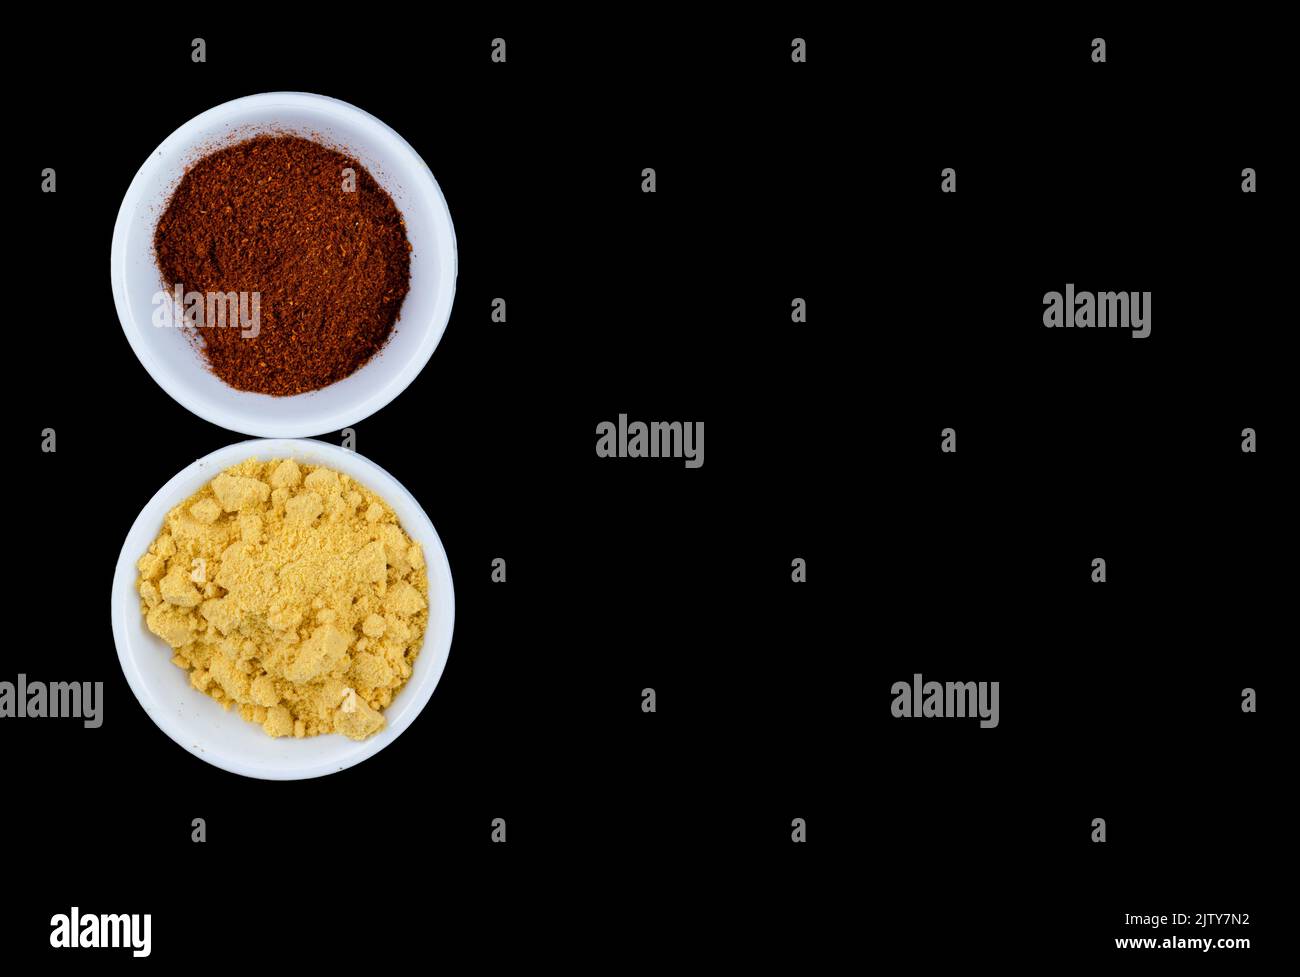 Yellow mustard and red Chilli powder in White bowls on a black background Stock Photo